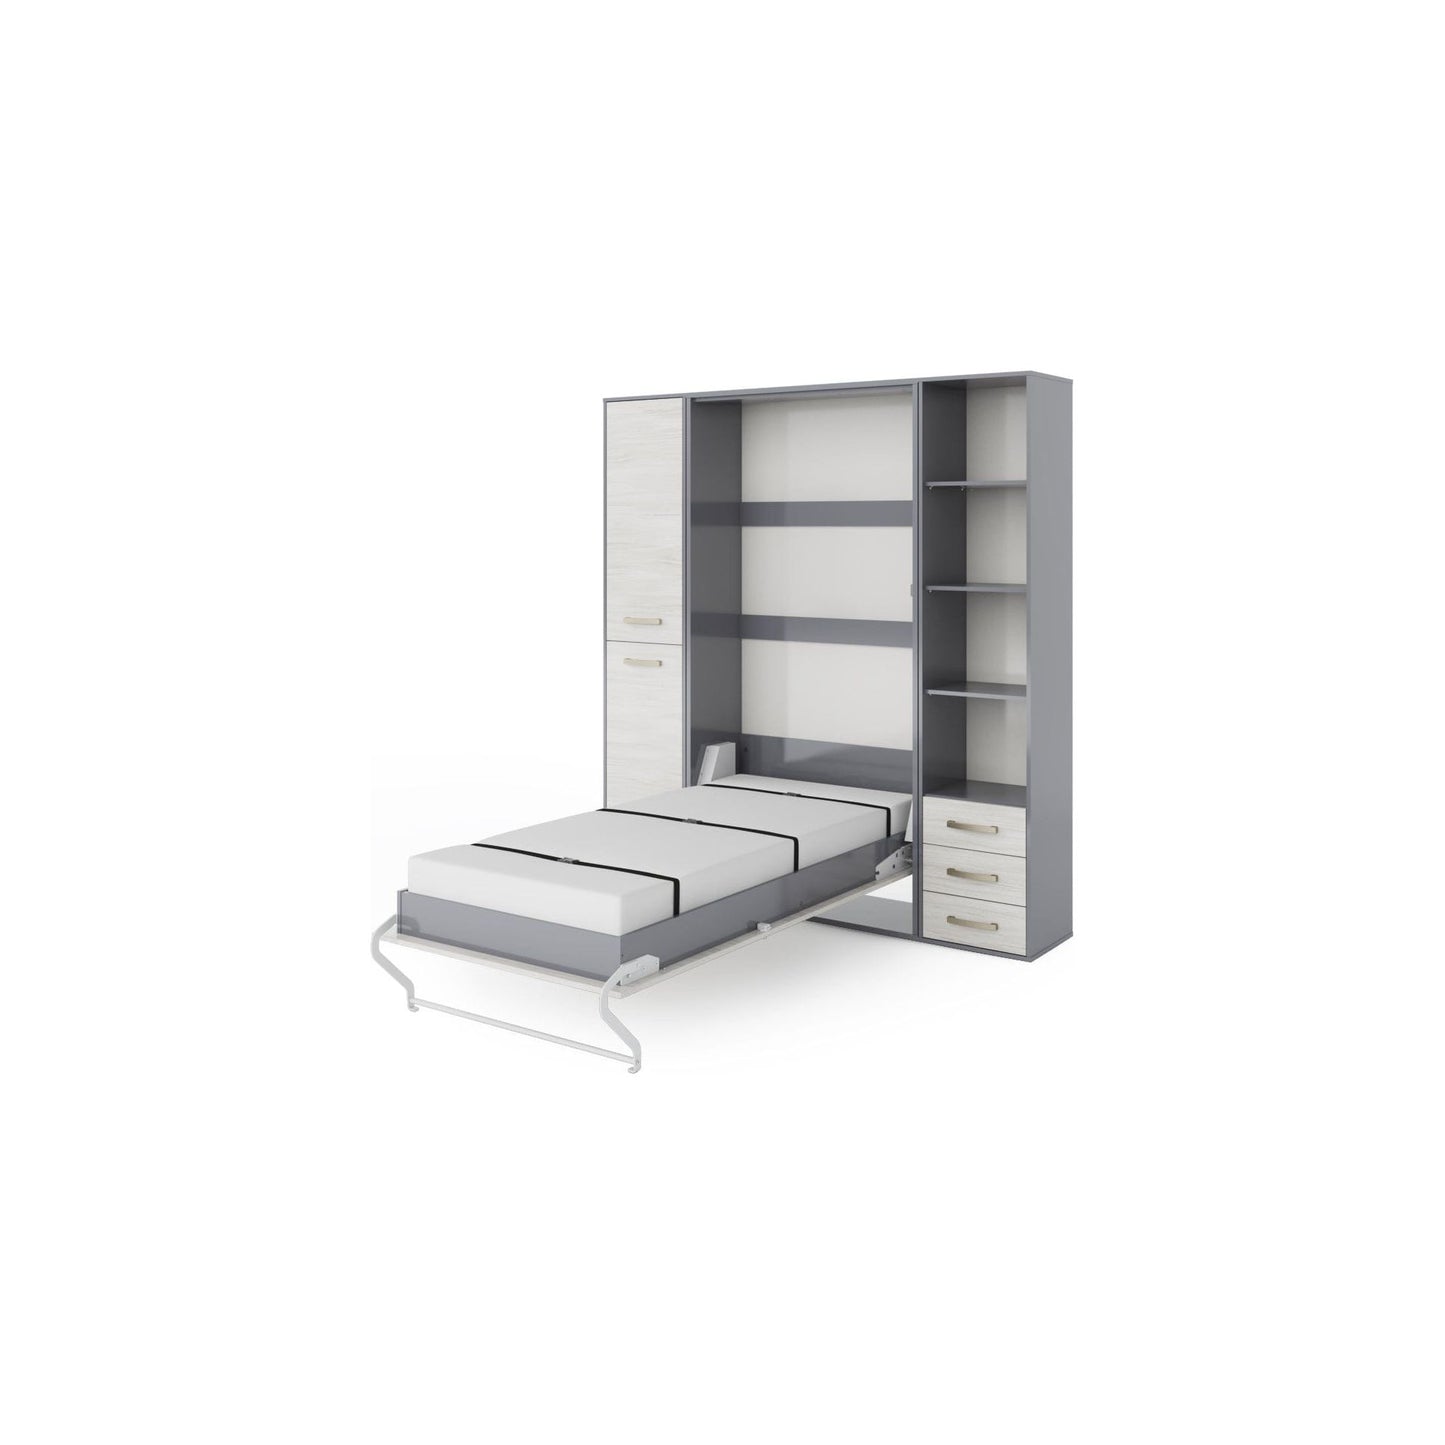 Maxima House Maxima House Invento Vertical Wall Bed, European Full Size with 2 cabinets